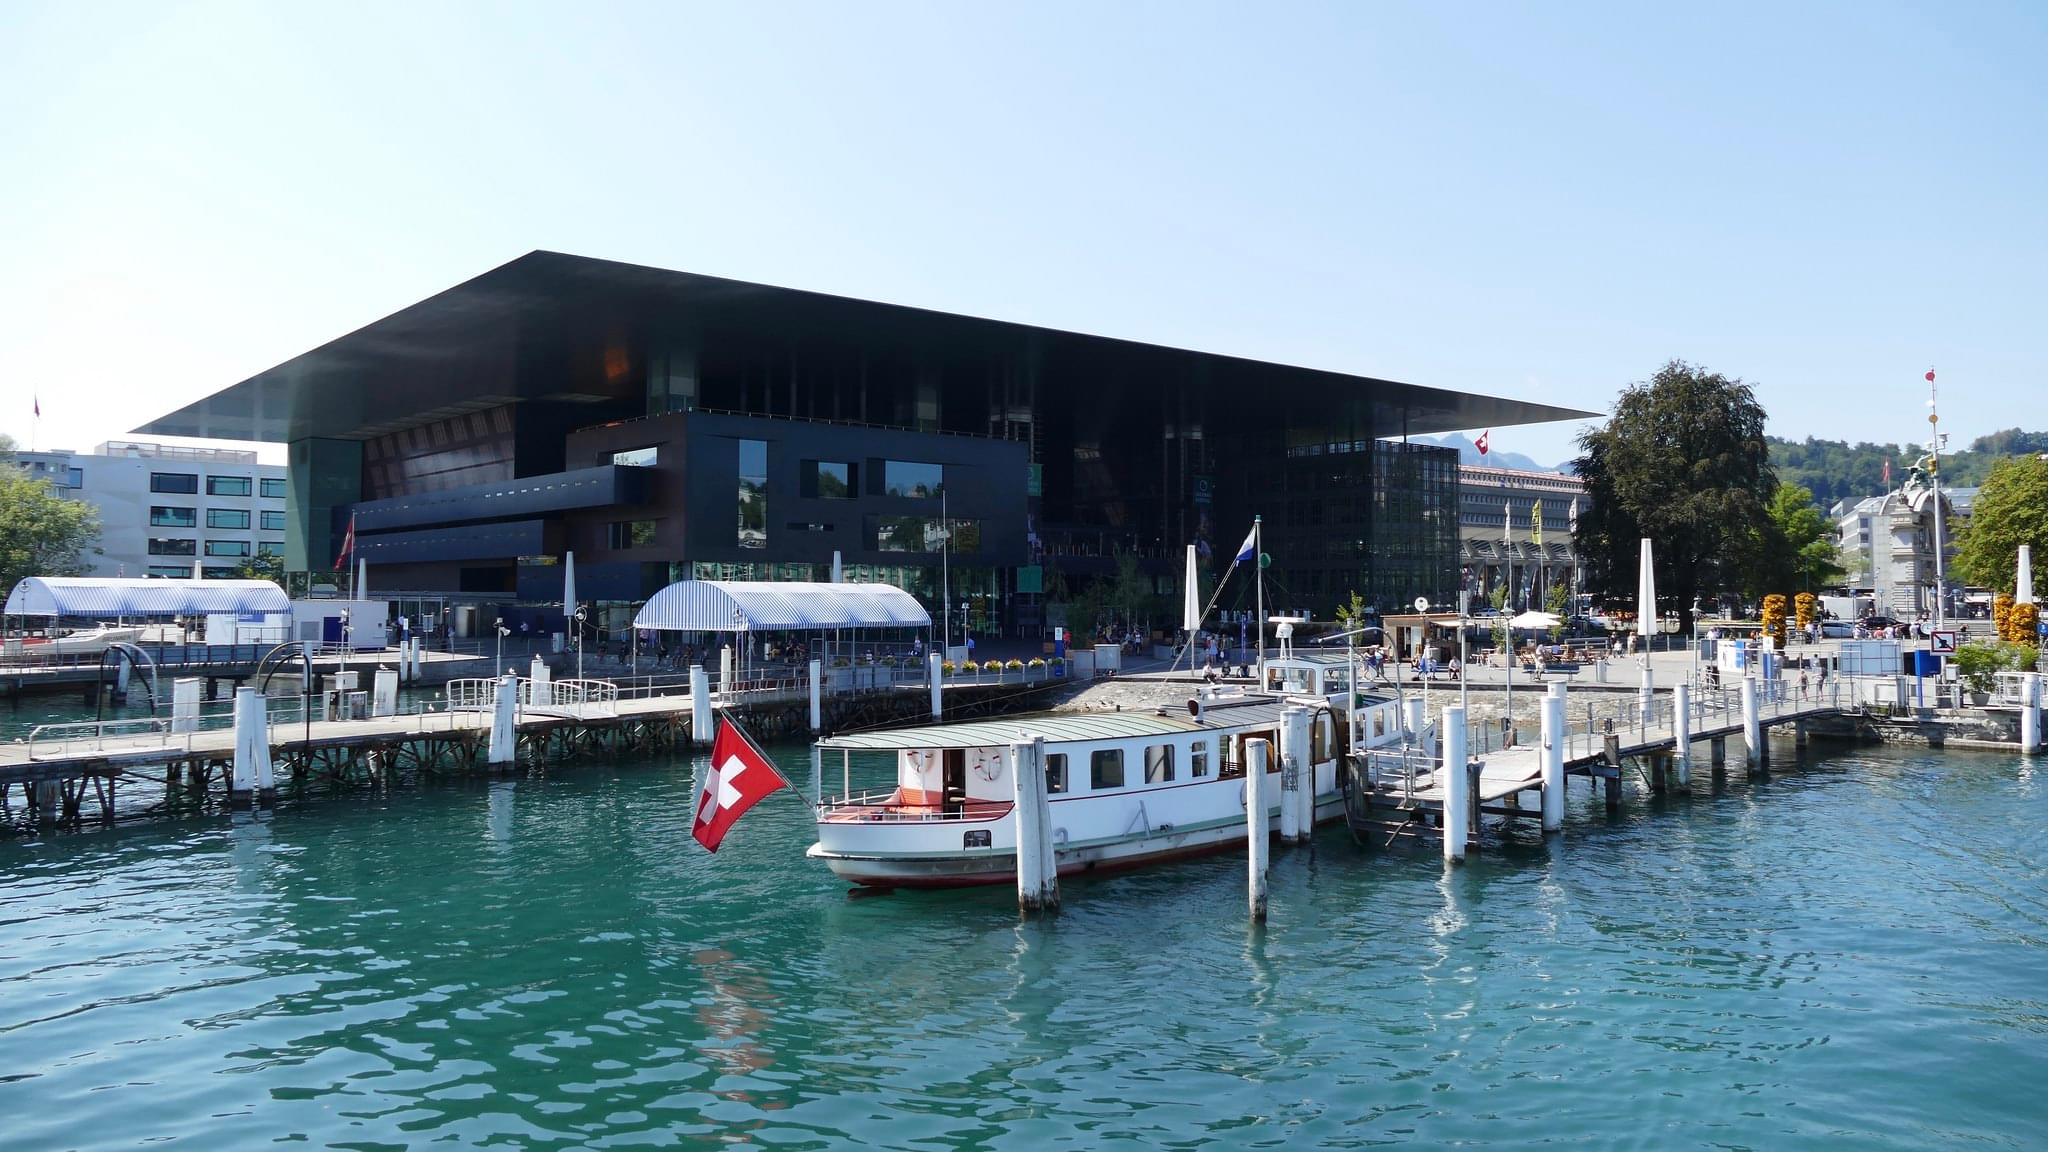 Lucerne Culture and Congress Centre Overview